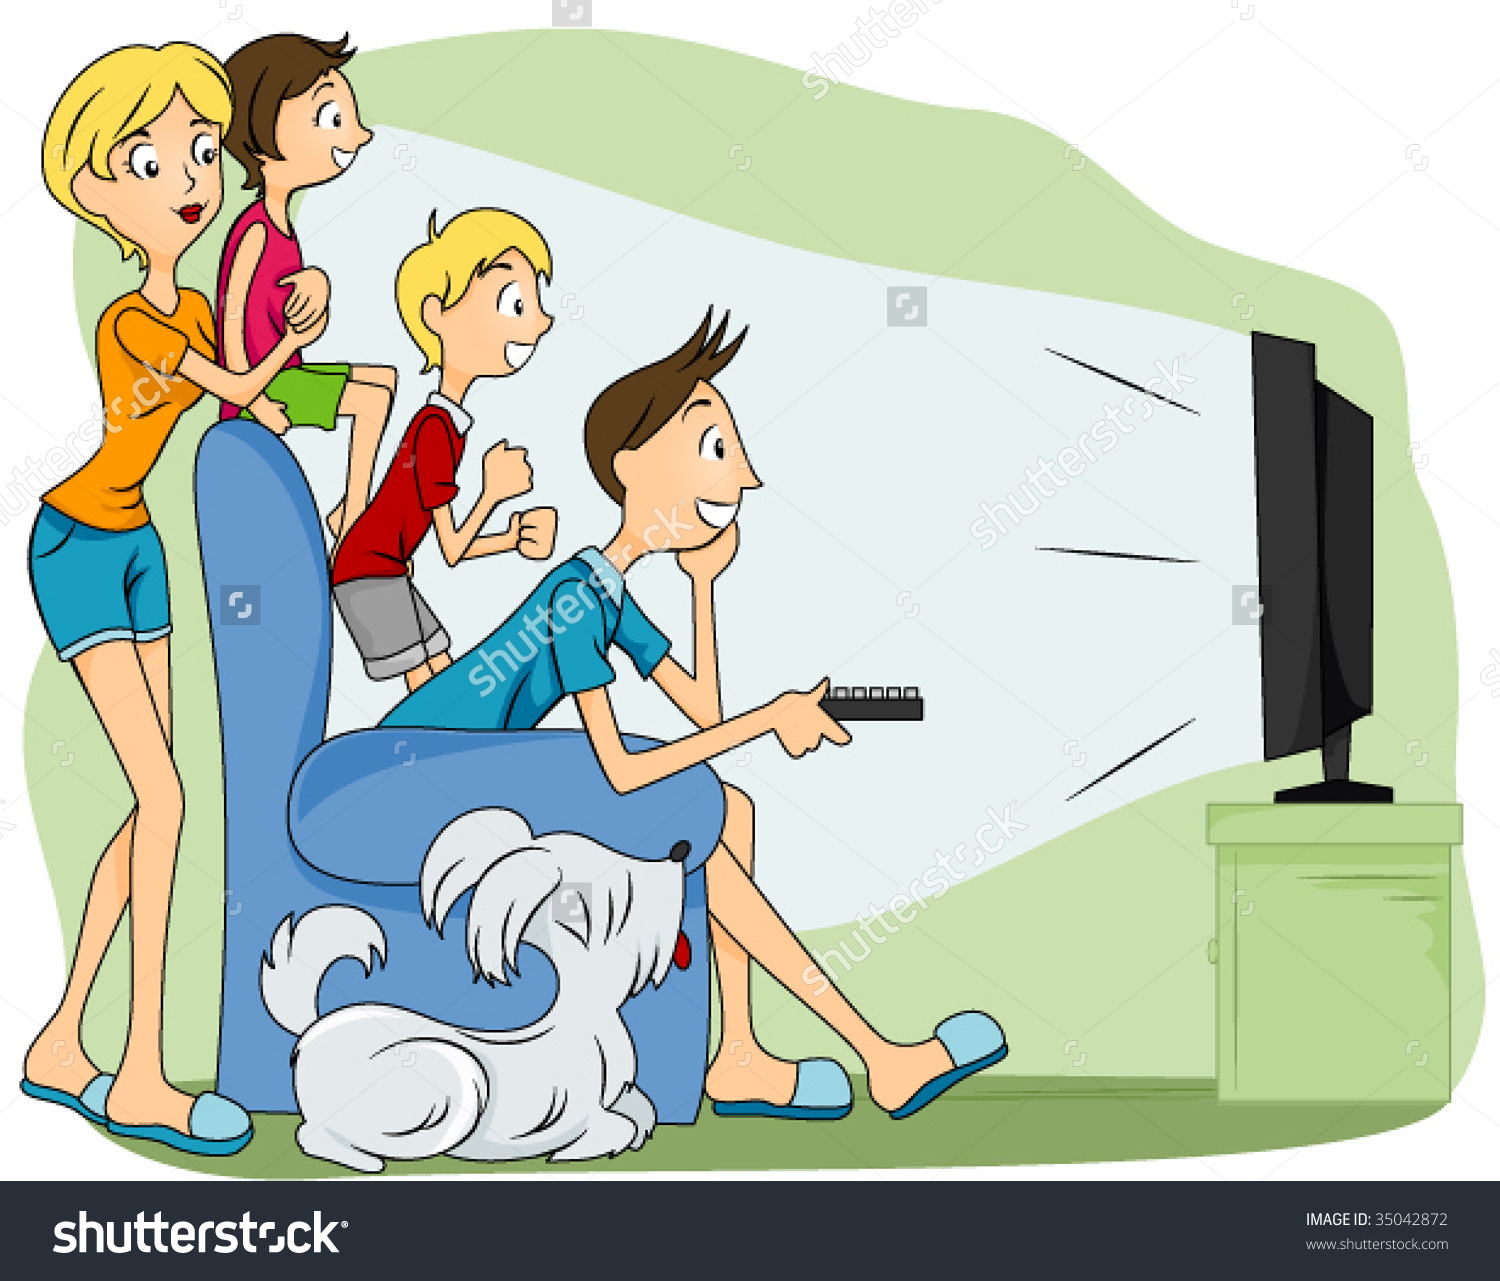 Watching Tv With Family Clipart.